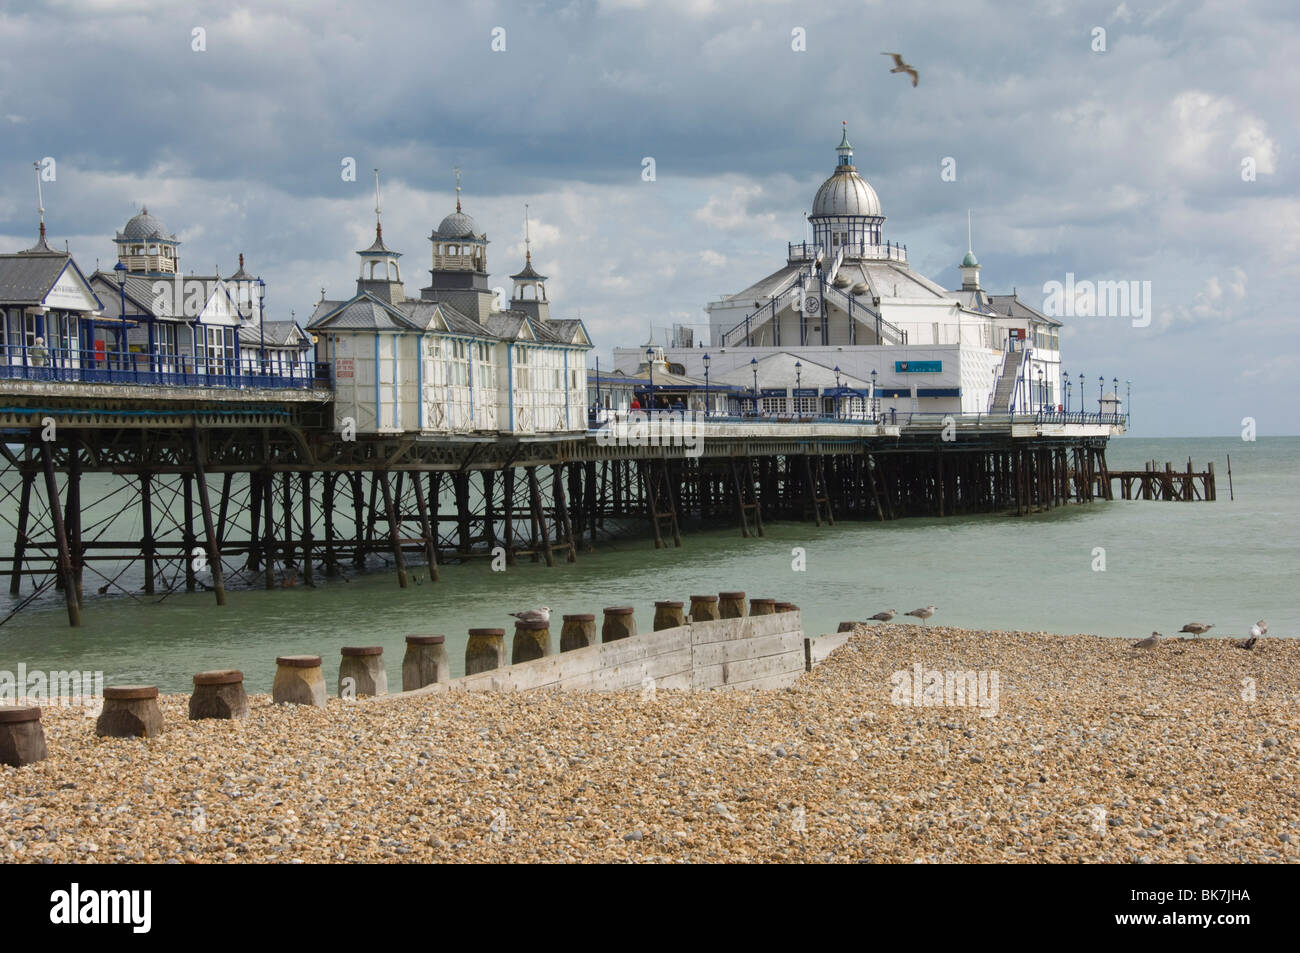 The Pier at Eastbourne, East Sussex, England, United Kingdom, Europe Stock Photo